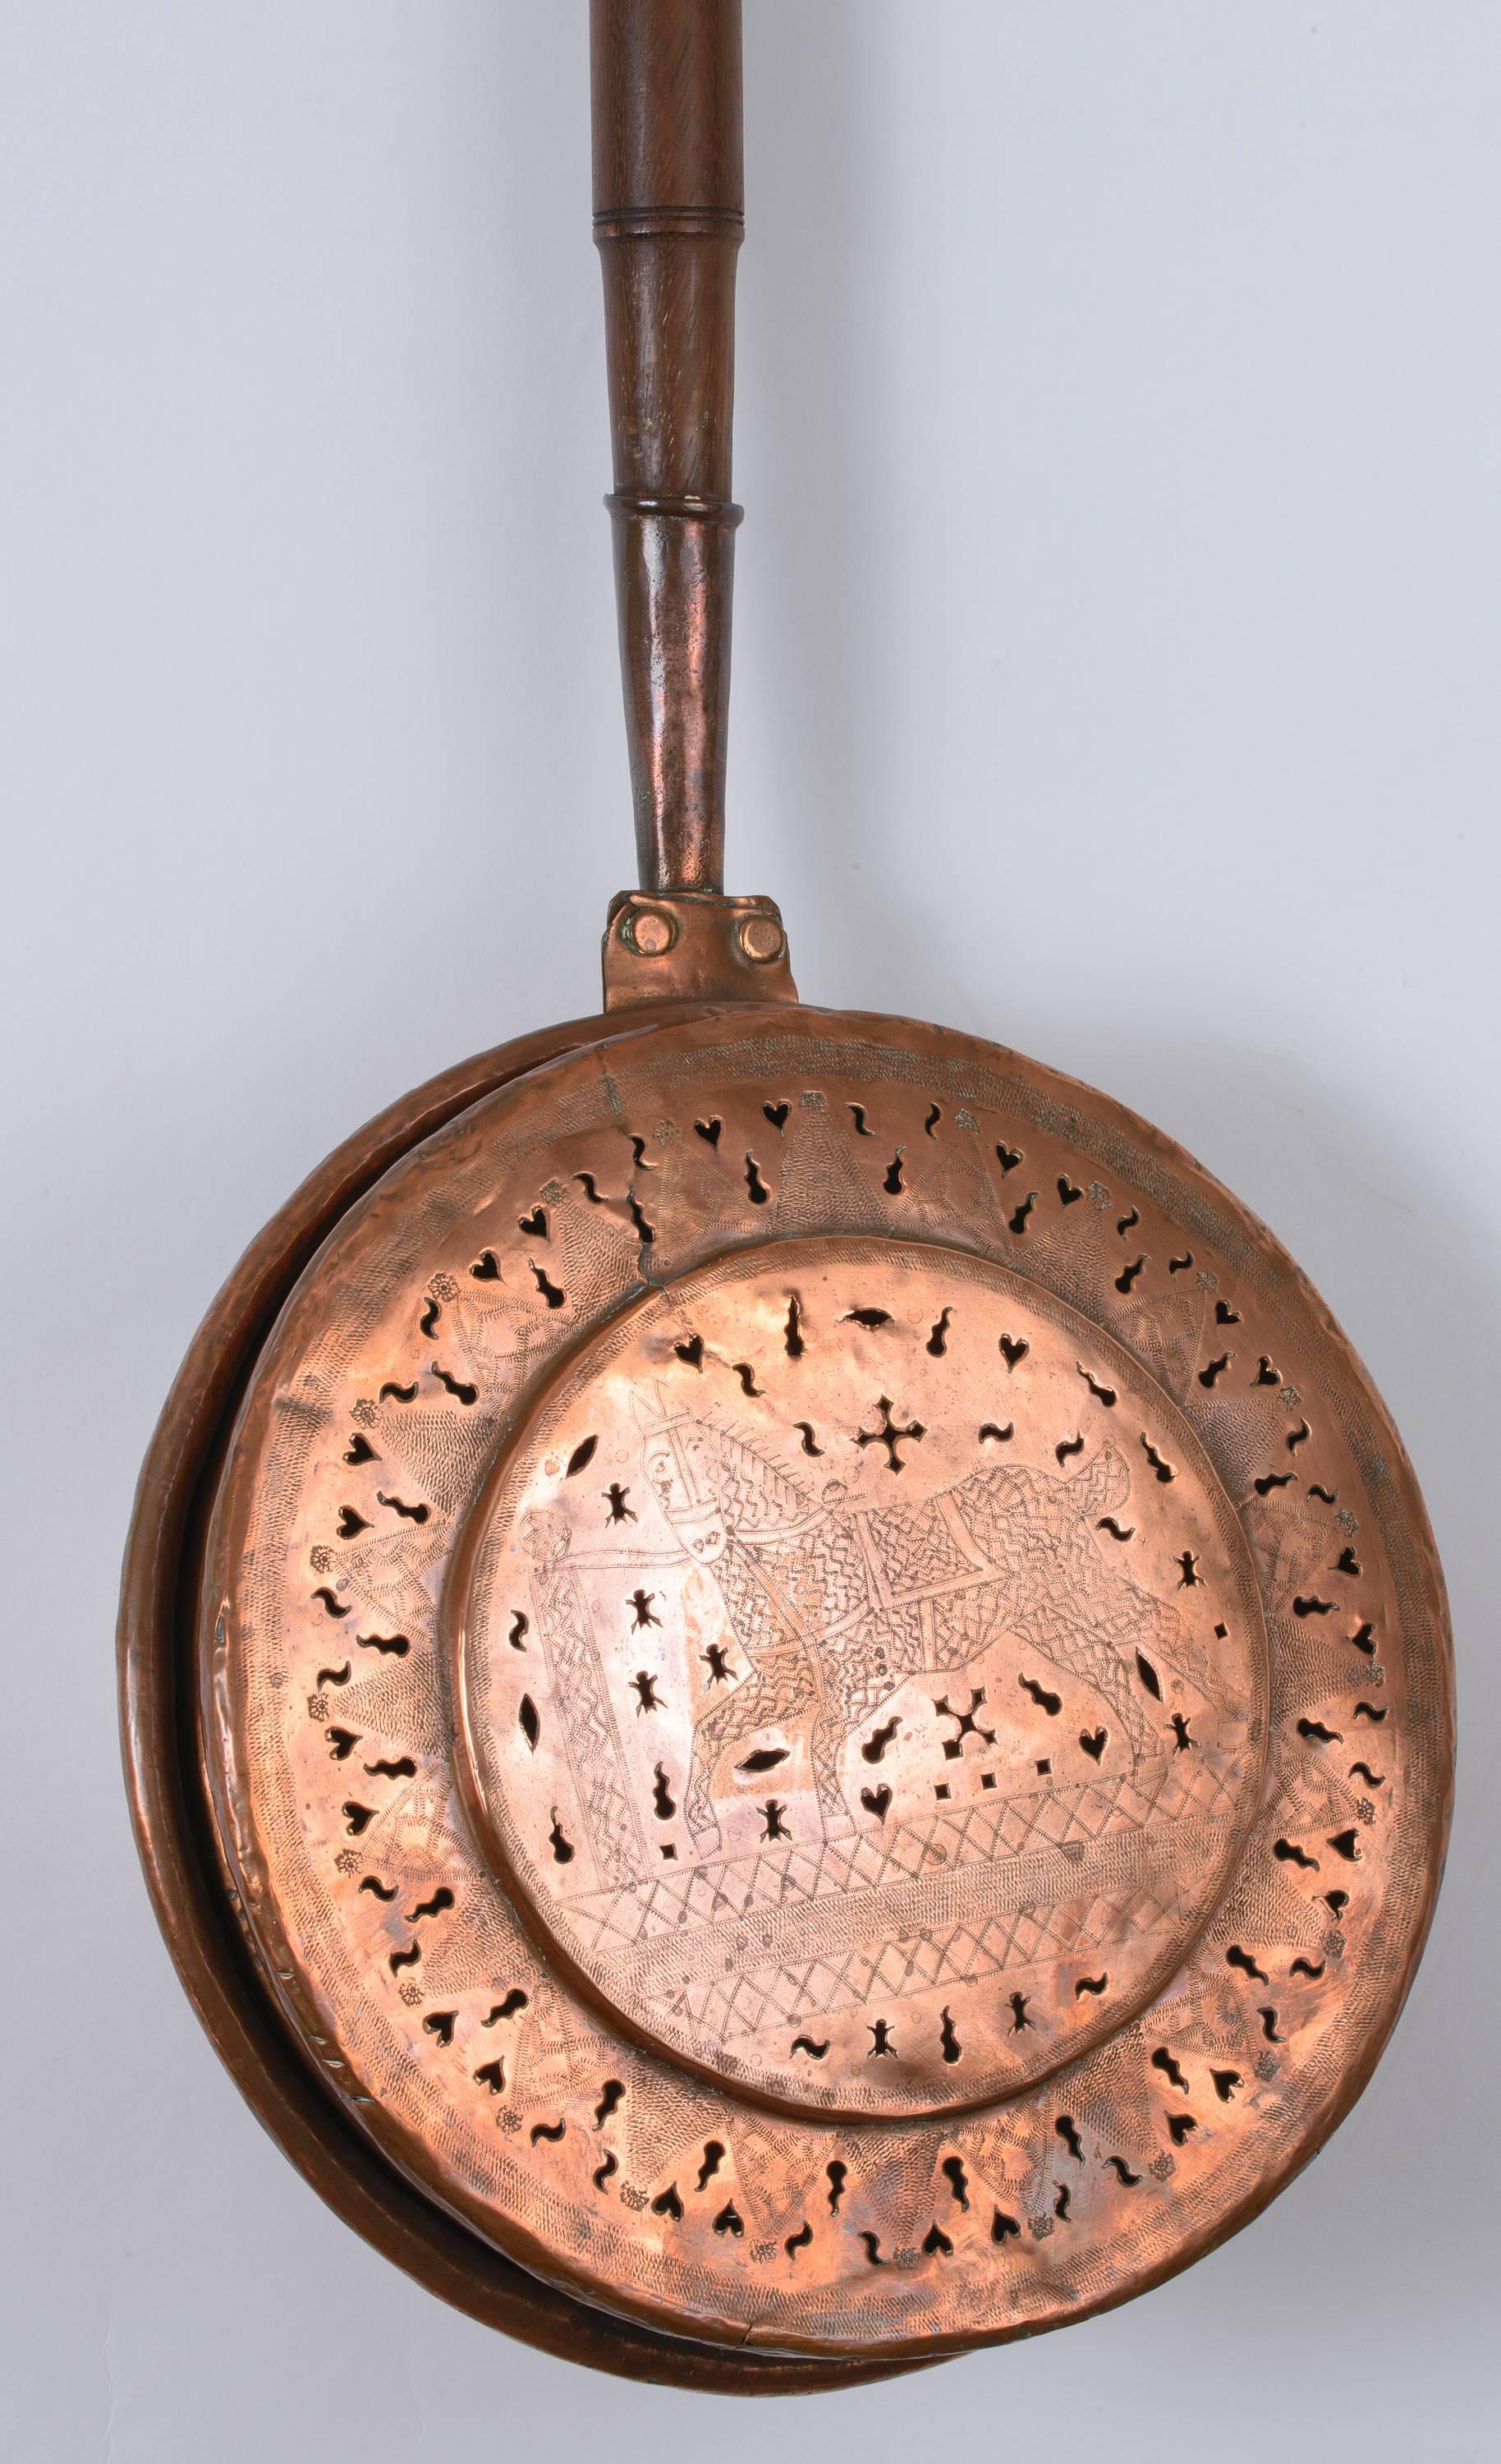 Copper pan is hand-hammered and hand tooled. On the center of the pan is a tethered horse with saddle. The tooling around the recessed edge is of continuous diamond shapes each with its individually tooled pattern. The overall perforations decorate